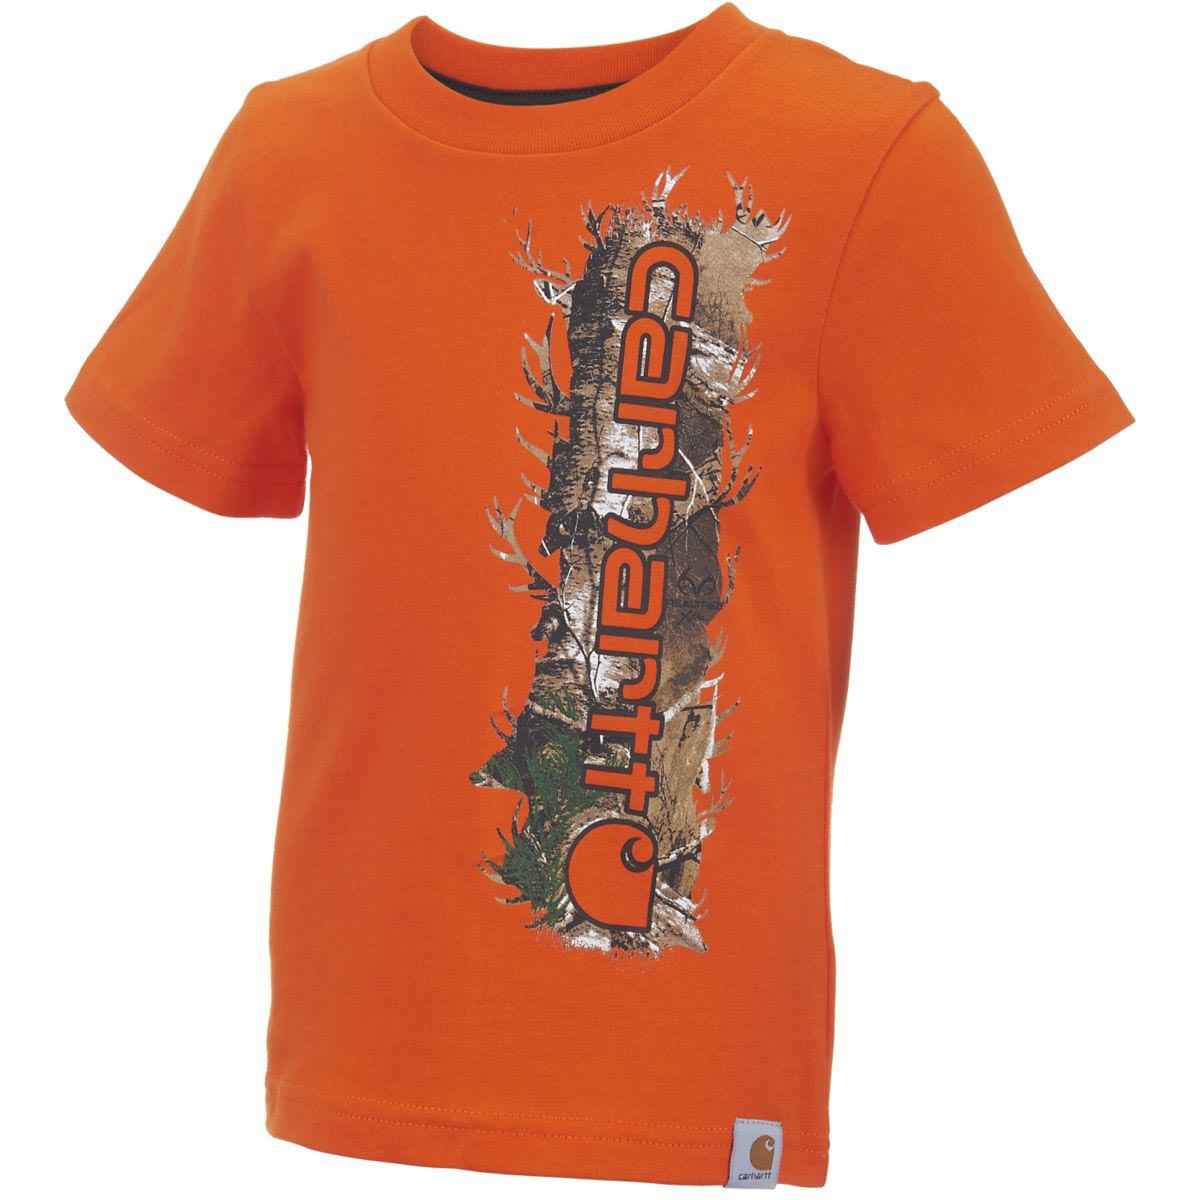 Carhartt Infant and Toddler Boys Vertical Camo Tee